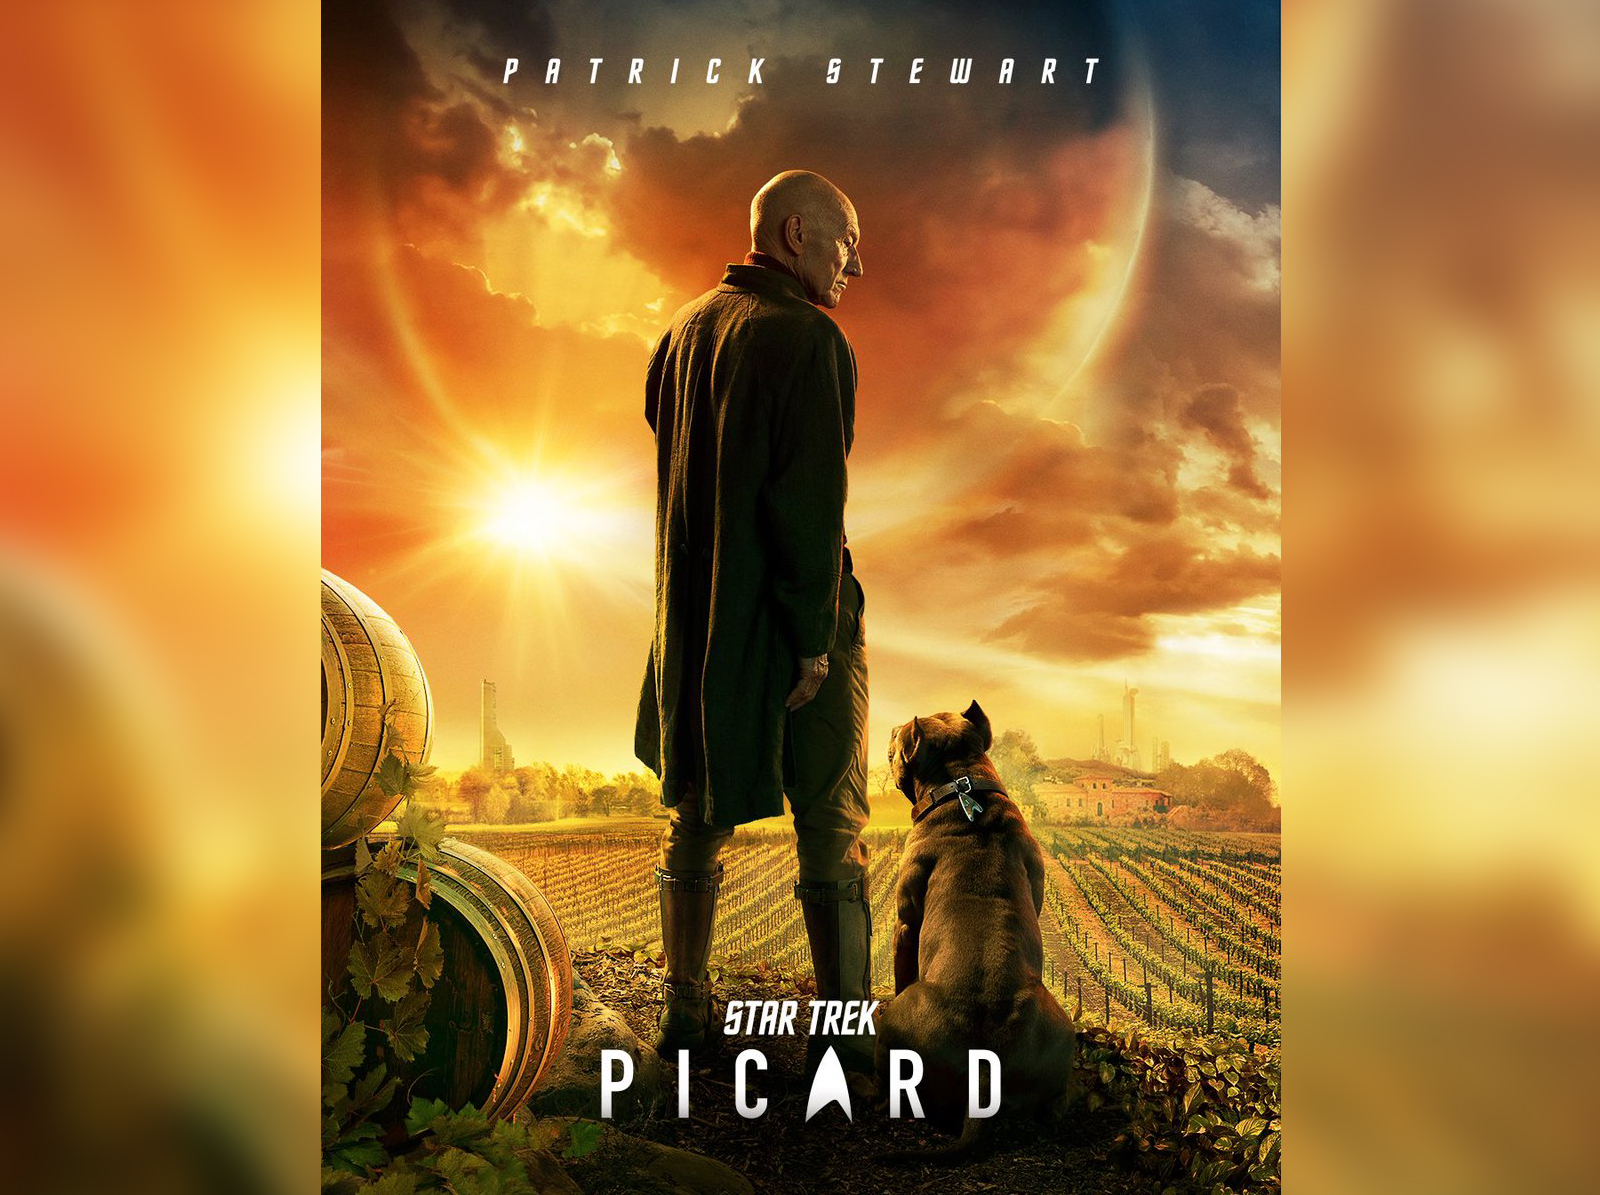 Picard's Dog Debuts in 'Star Trek' Spin-Off Poster